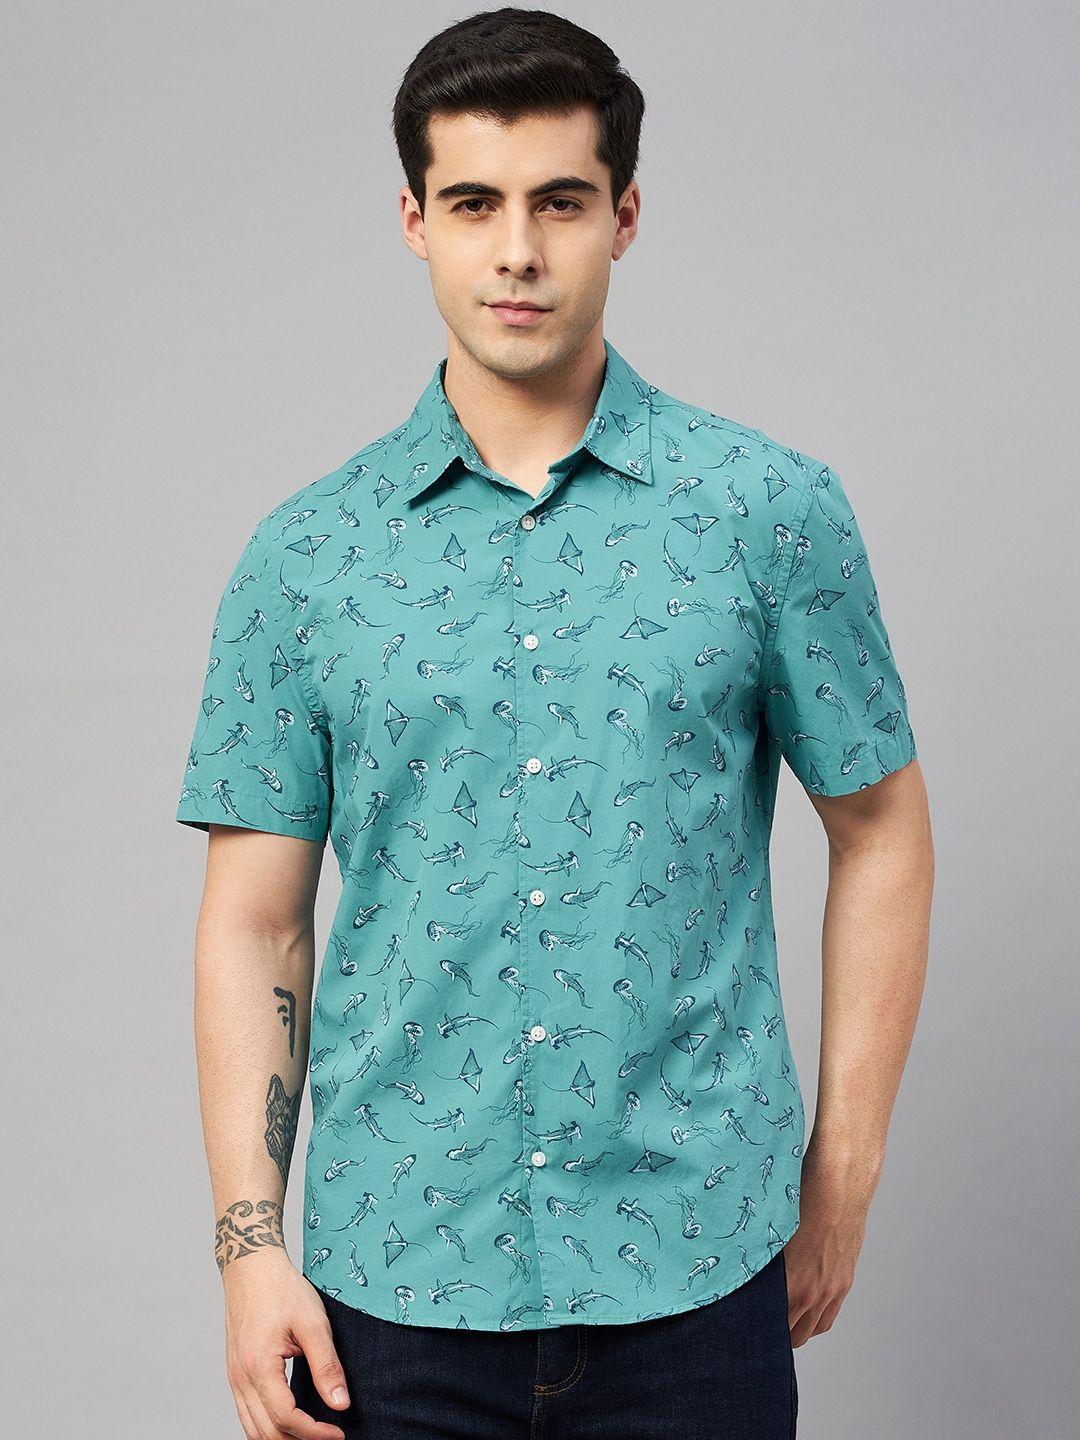 marks & spencer men turquoise blue printed pure cotton tropical casual shirt